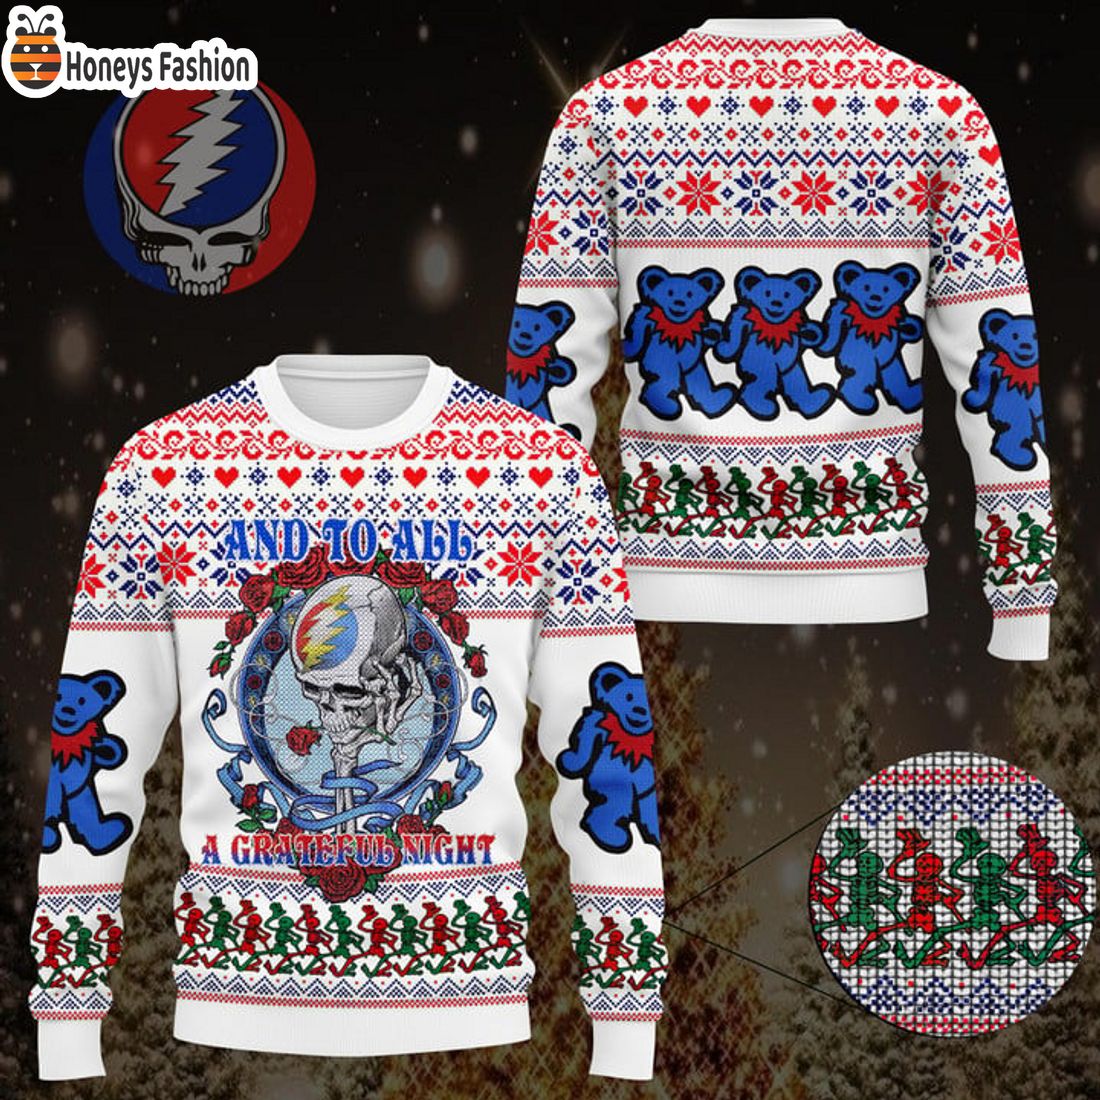 HOT Grateful Dead Skull And Roses To All Ugly Christmas Sweater